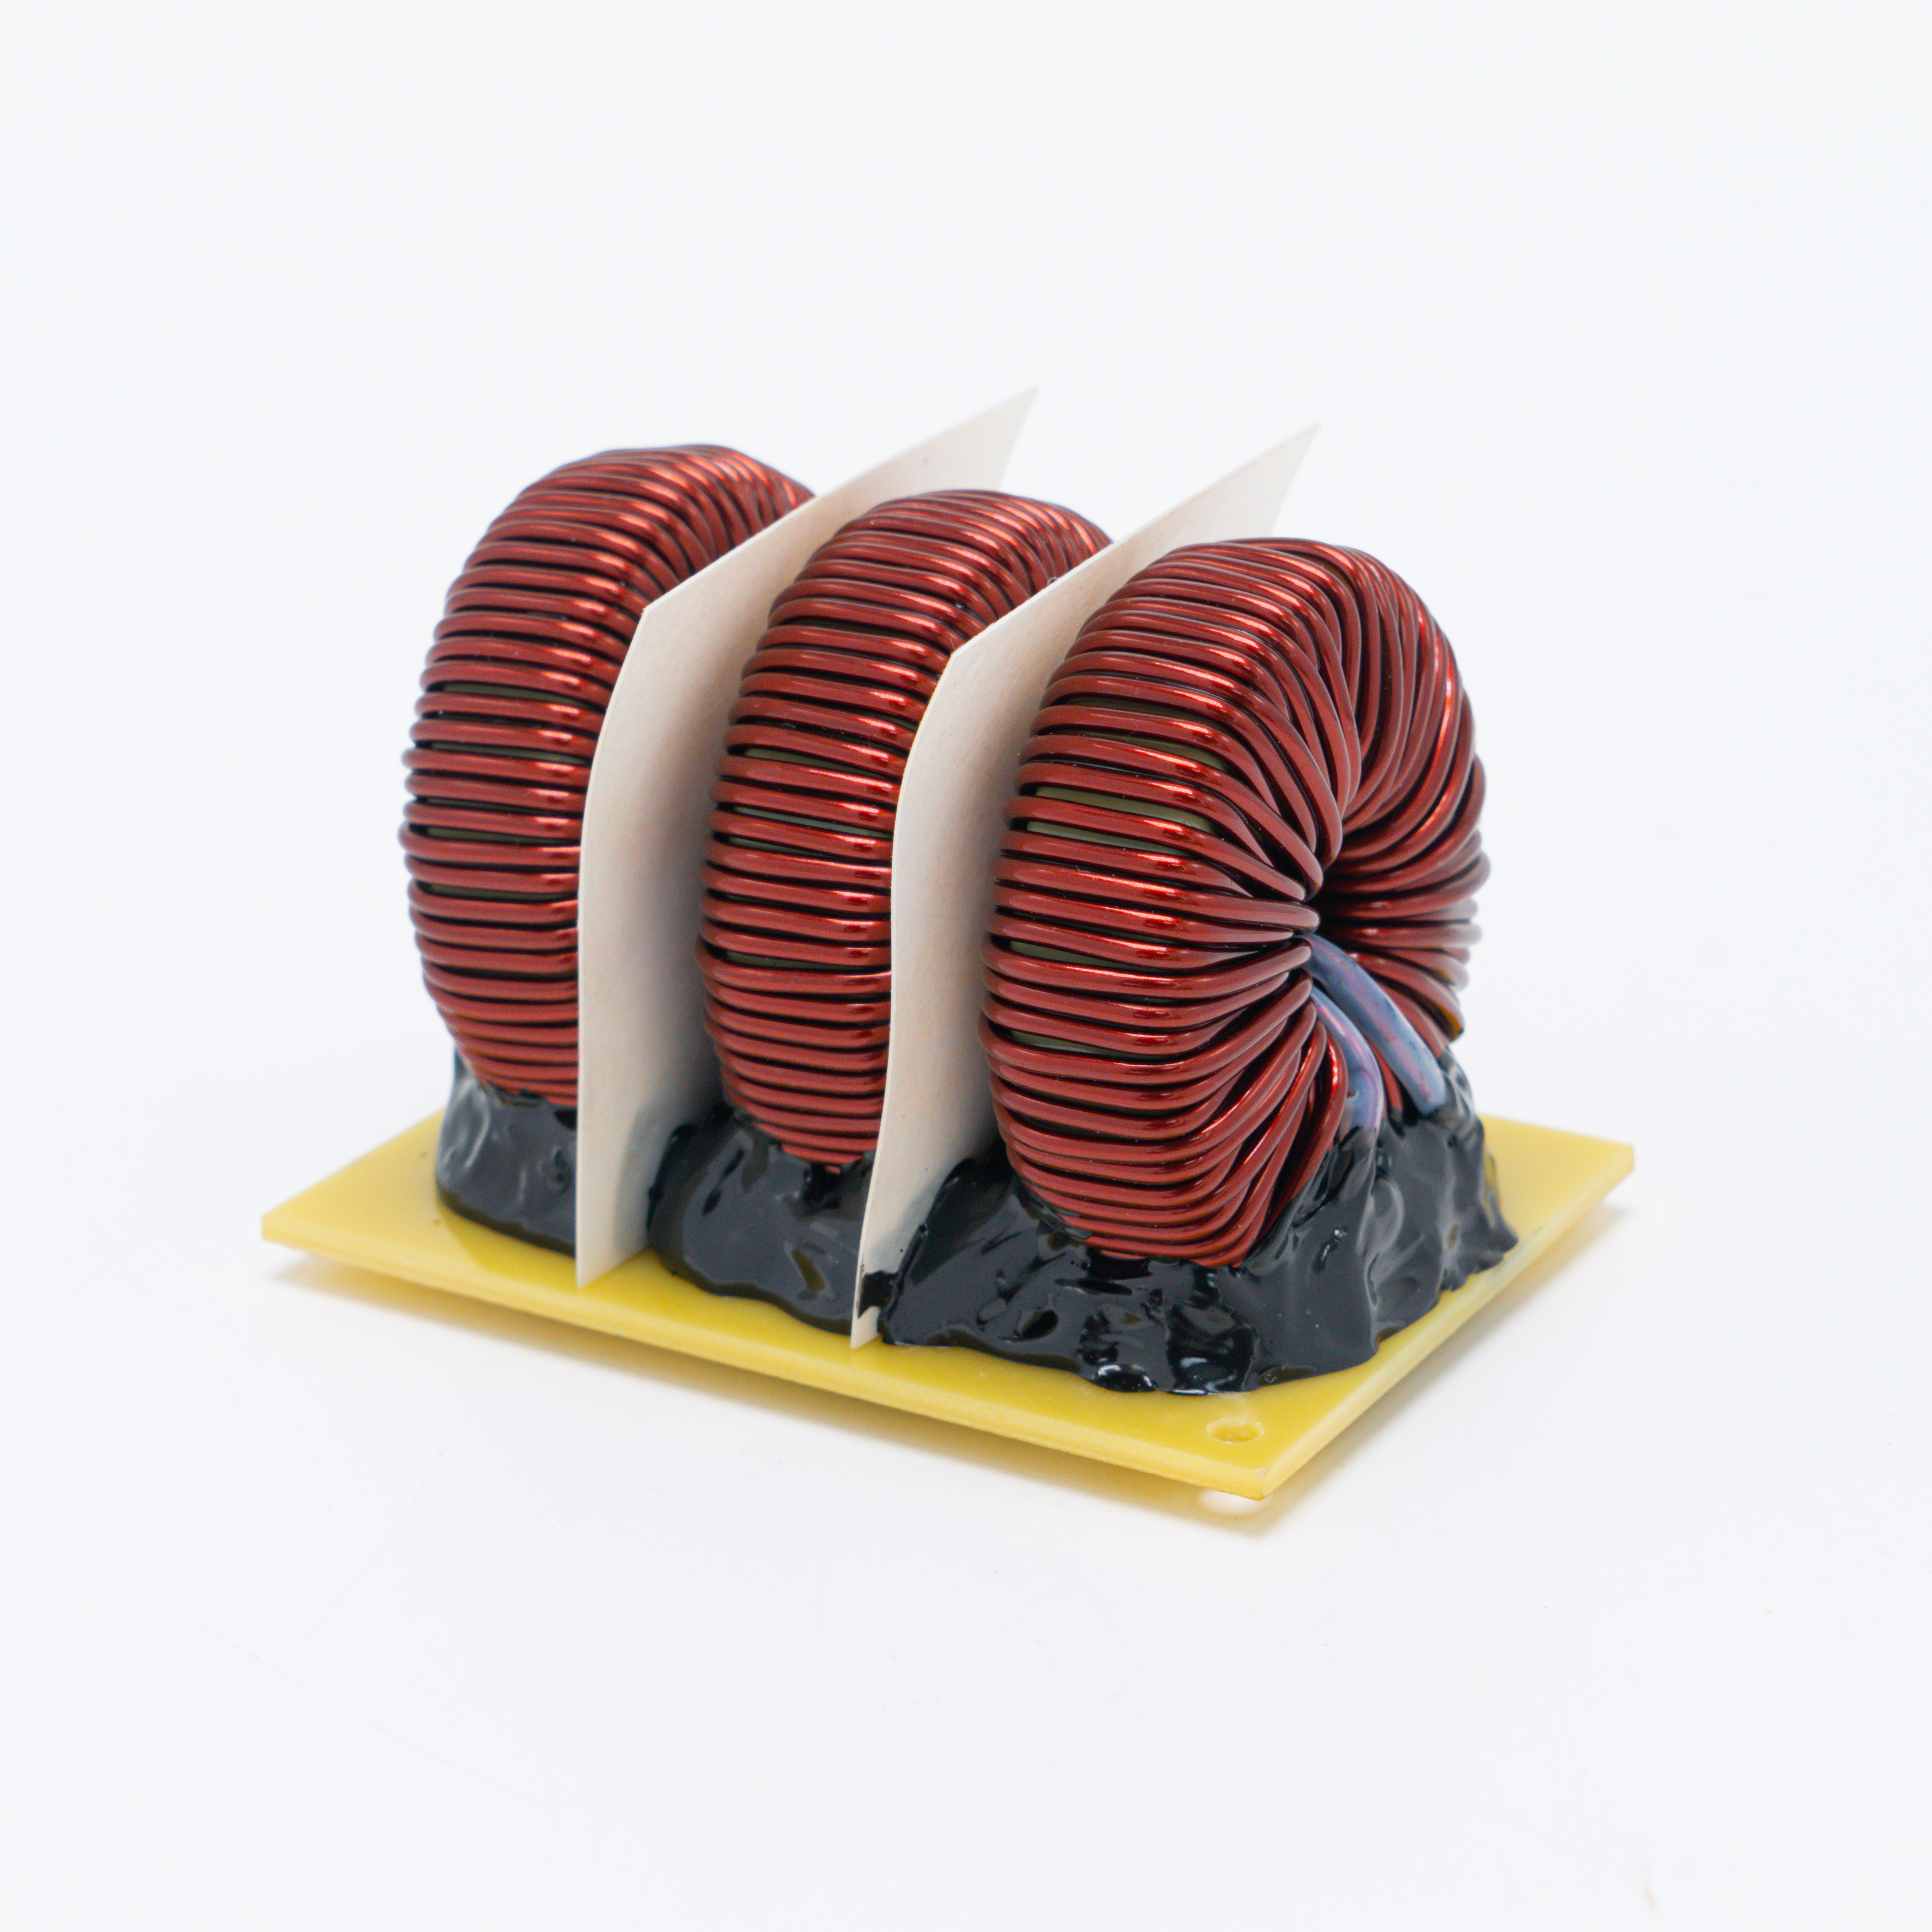 1H Inductor Coil-High-Frequency Electromagnetic Wire Filter For Choke Applications